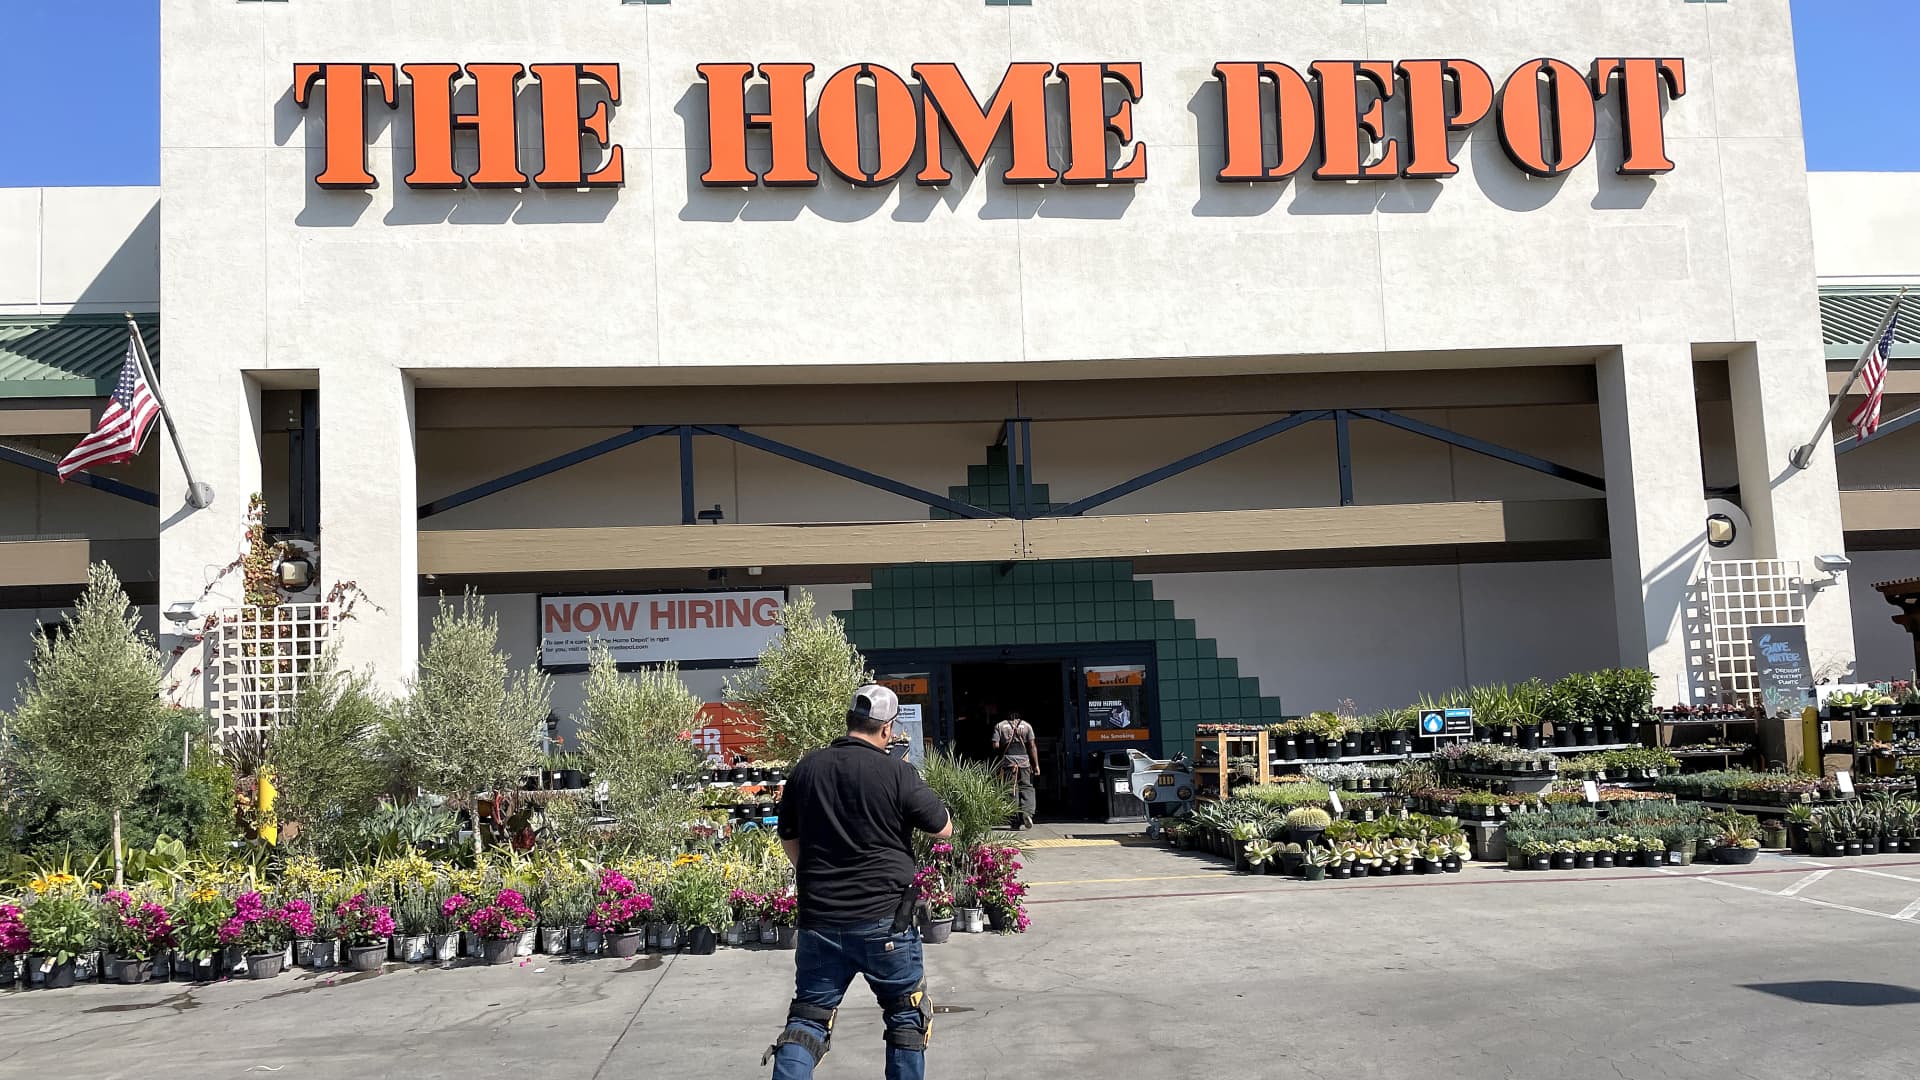 Home Depot and Lowe’s cite strong demand, but softening could be ahead